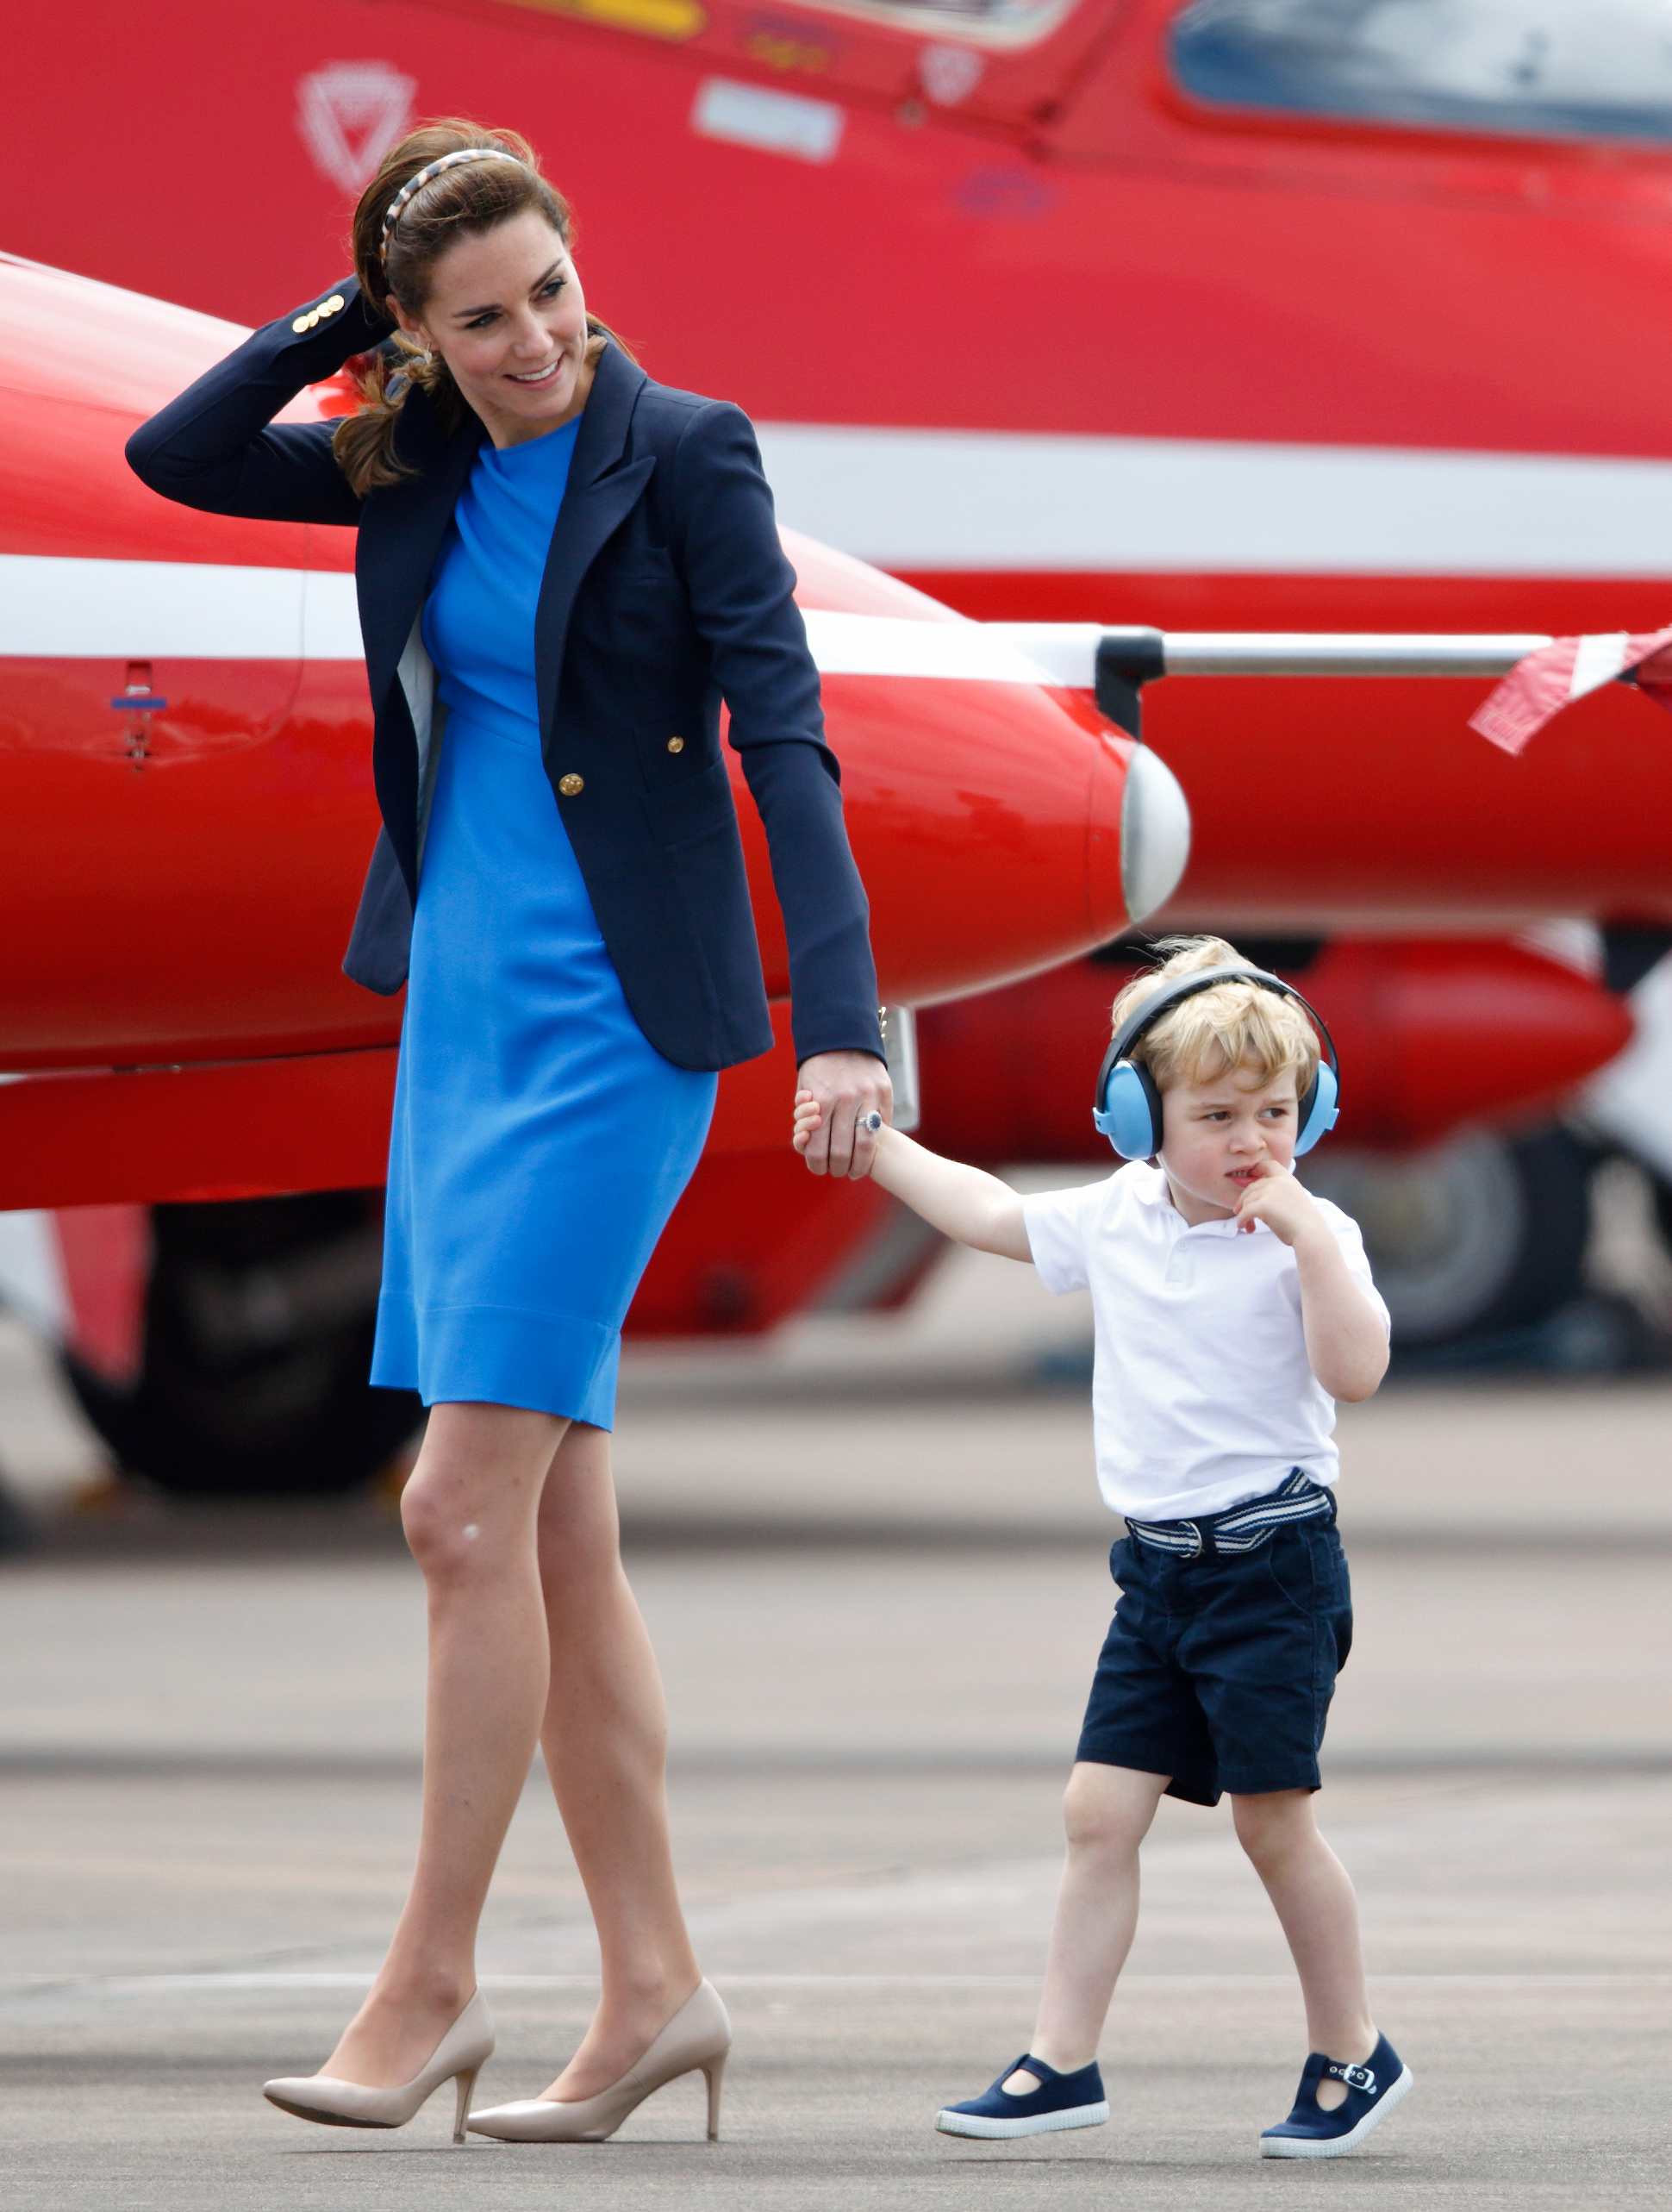 Catherine, Duchess of Cambridge and Prince George of Cambridge visit the Royal International Air Tattoo at RAF Fairford, England, on July 8, 2016.